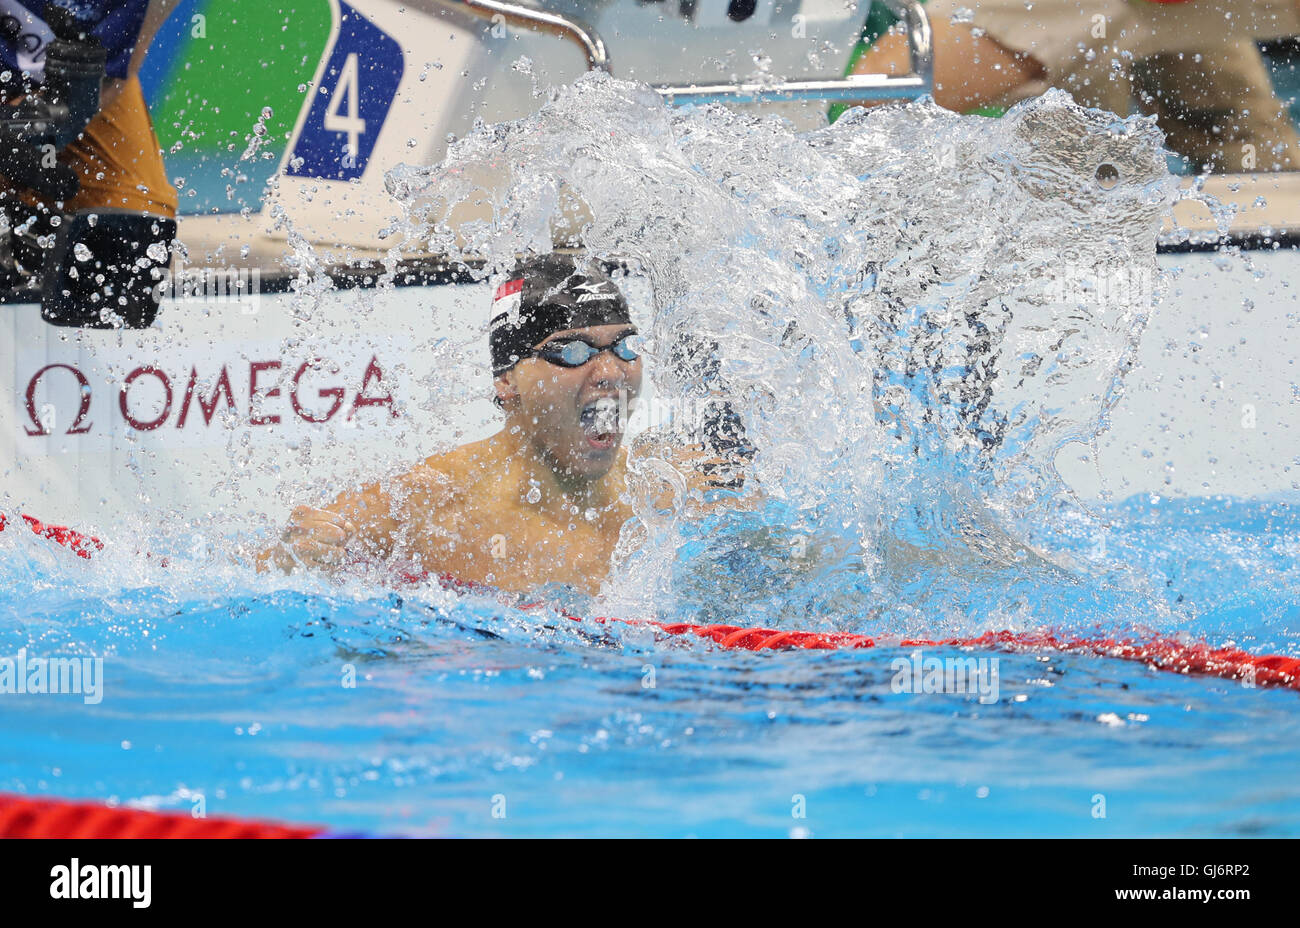 Singapore's Joseph Schooling celebrates winning the Men's 100m Butterfly Final at the Olympic Aquatics Stadium on the seventh day of the Rio Olympic Games, Brazil. Stock Photo